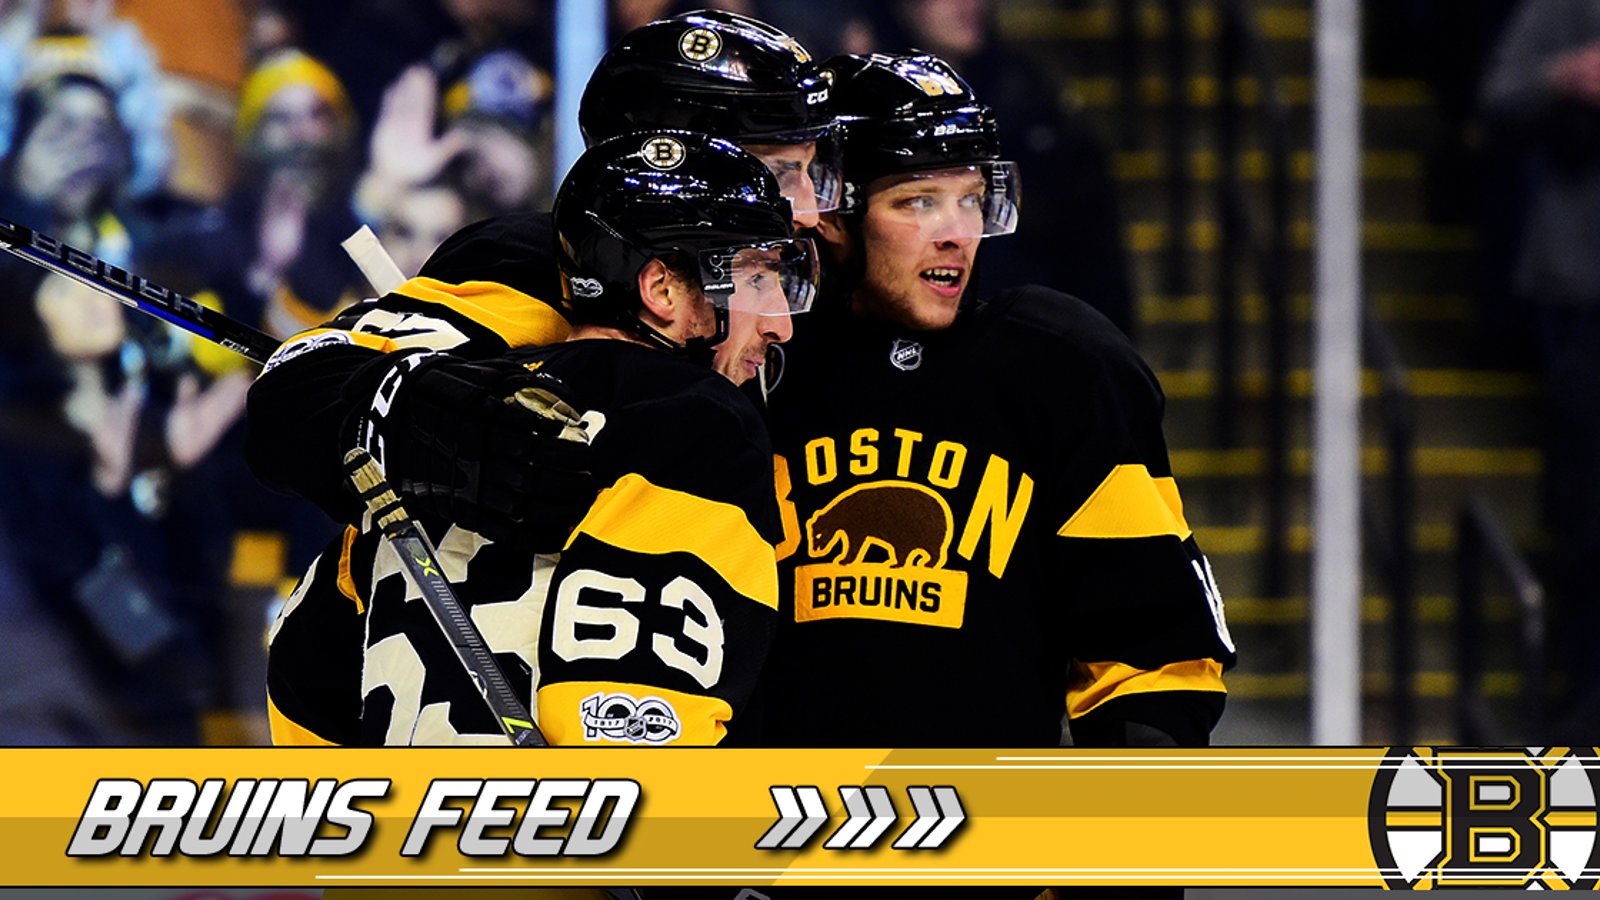 Boston Bruins Forward admits not being himself lately.